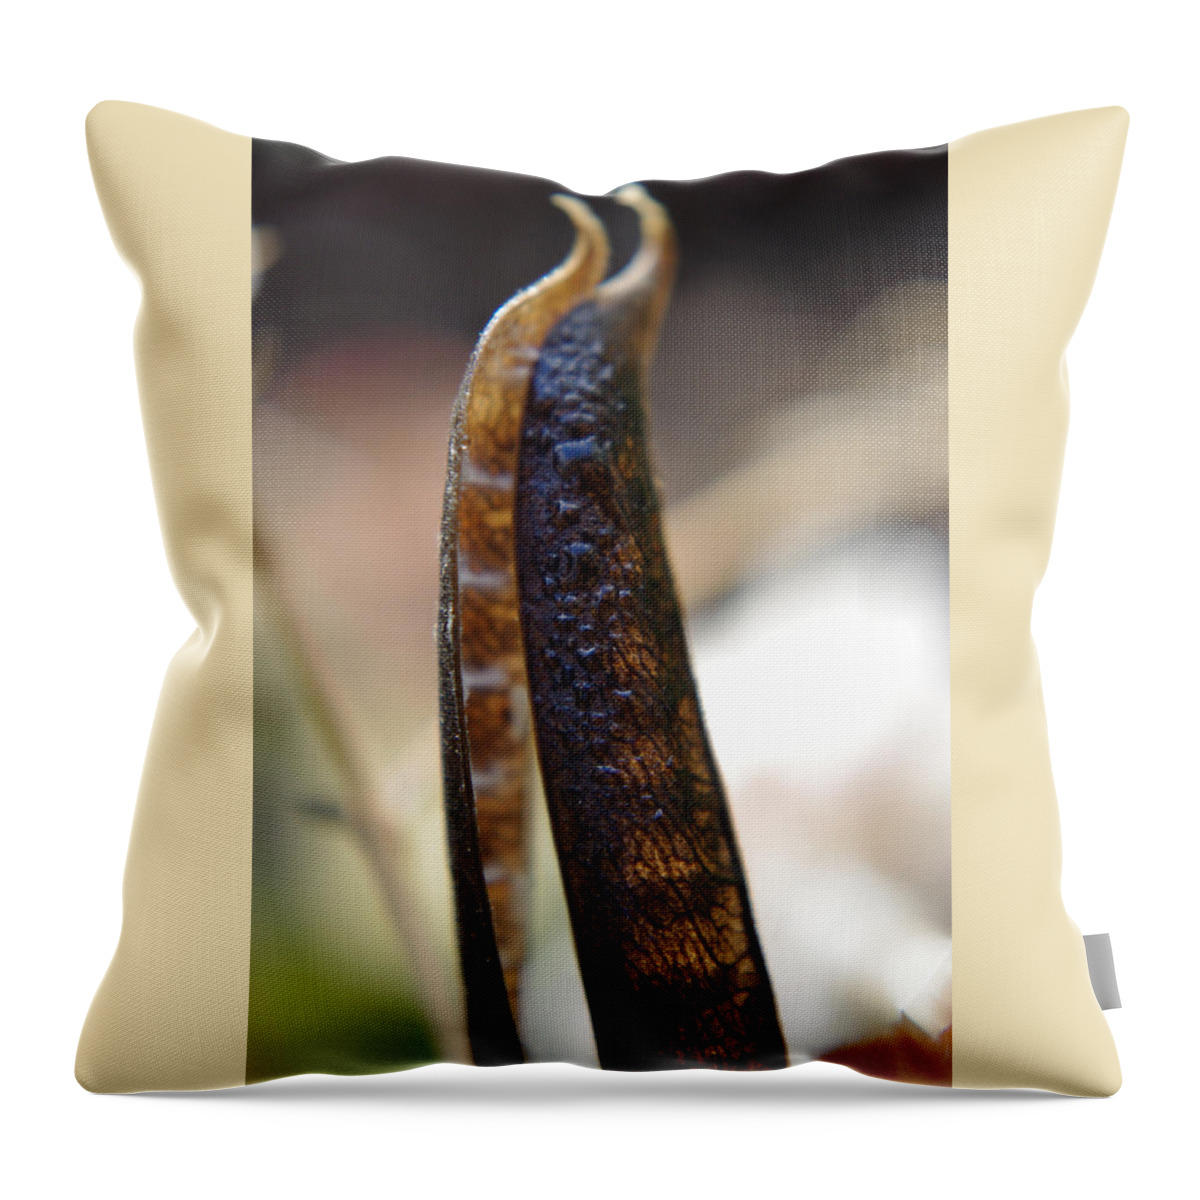 Adria Trail Throw Pillow featuring the photograph Pod Halves by Adria Trail